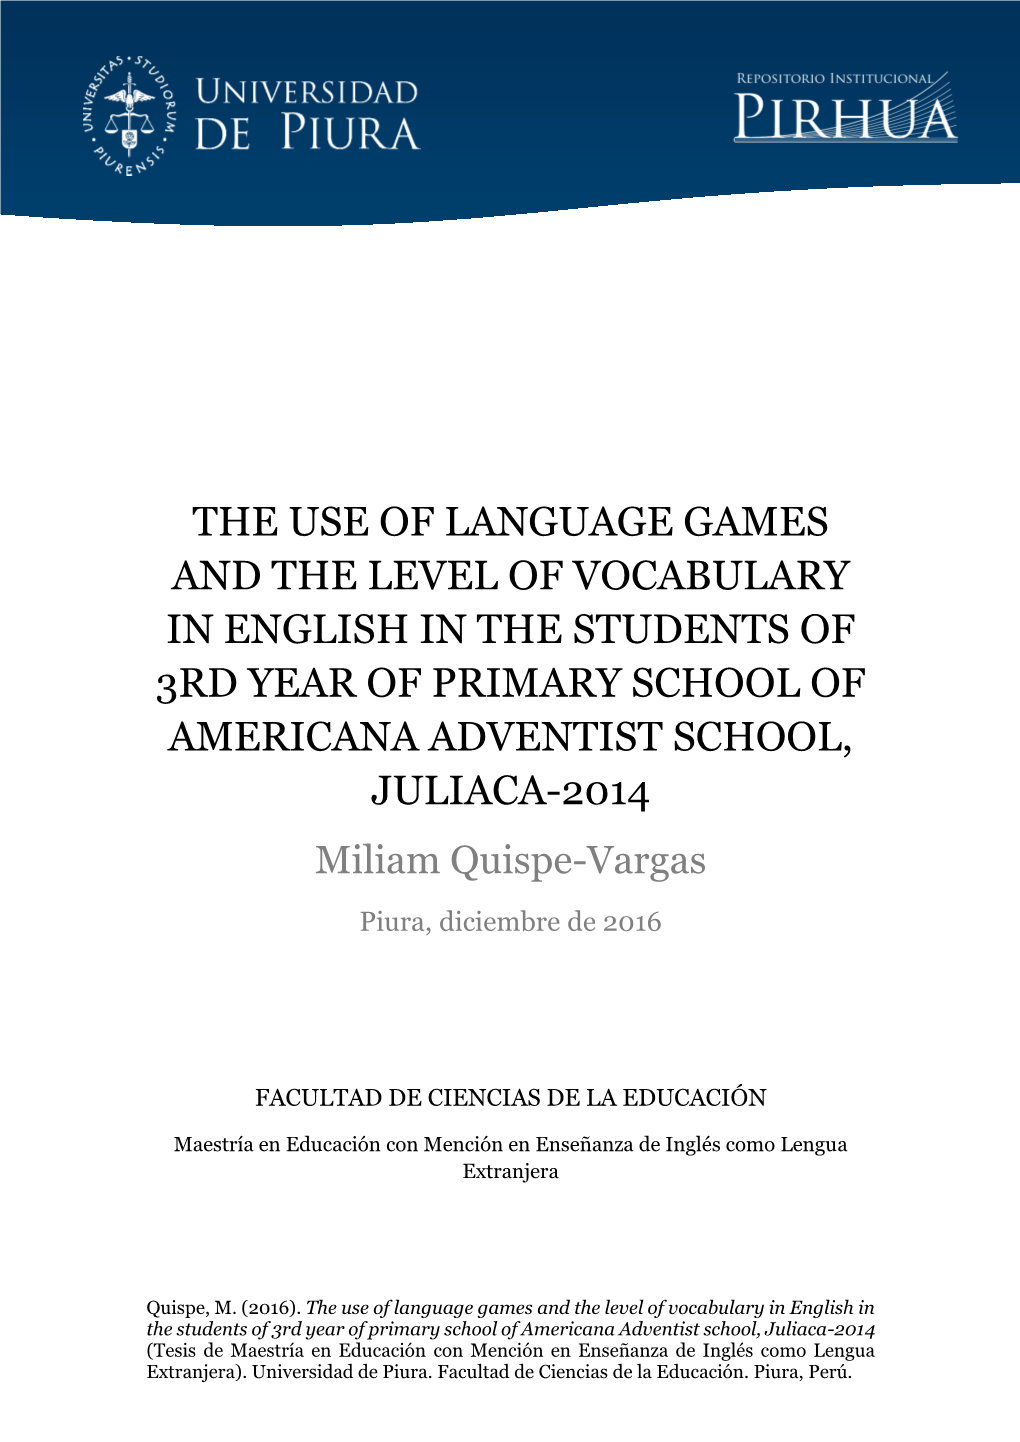 The Use of Language Games and the Level Of